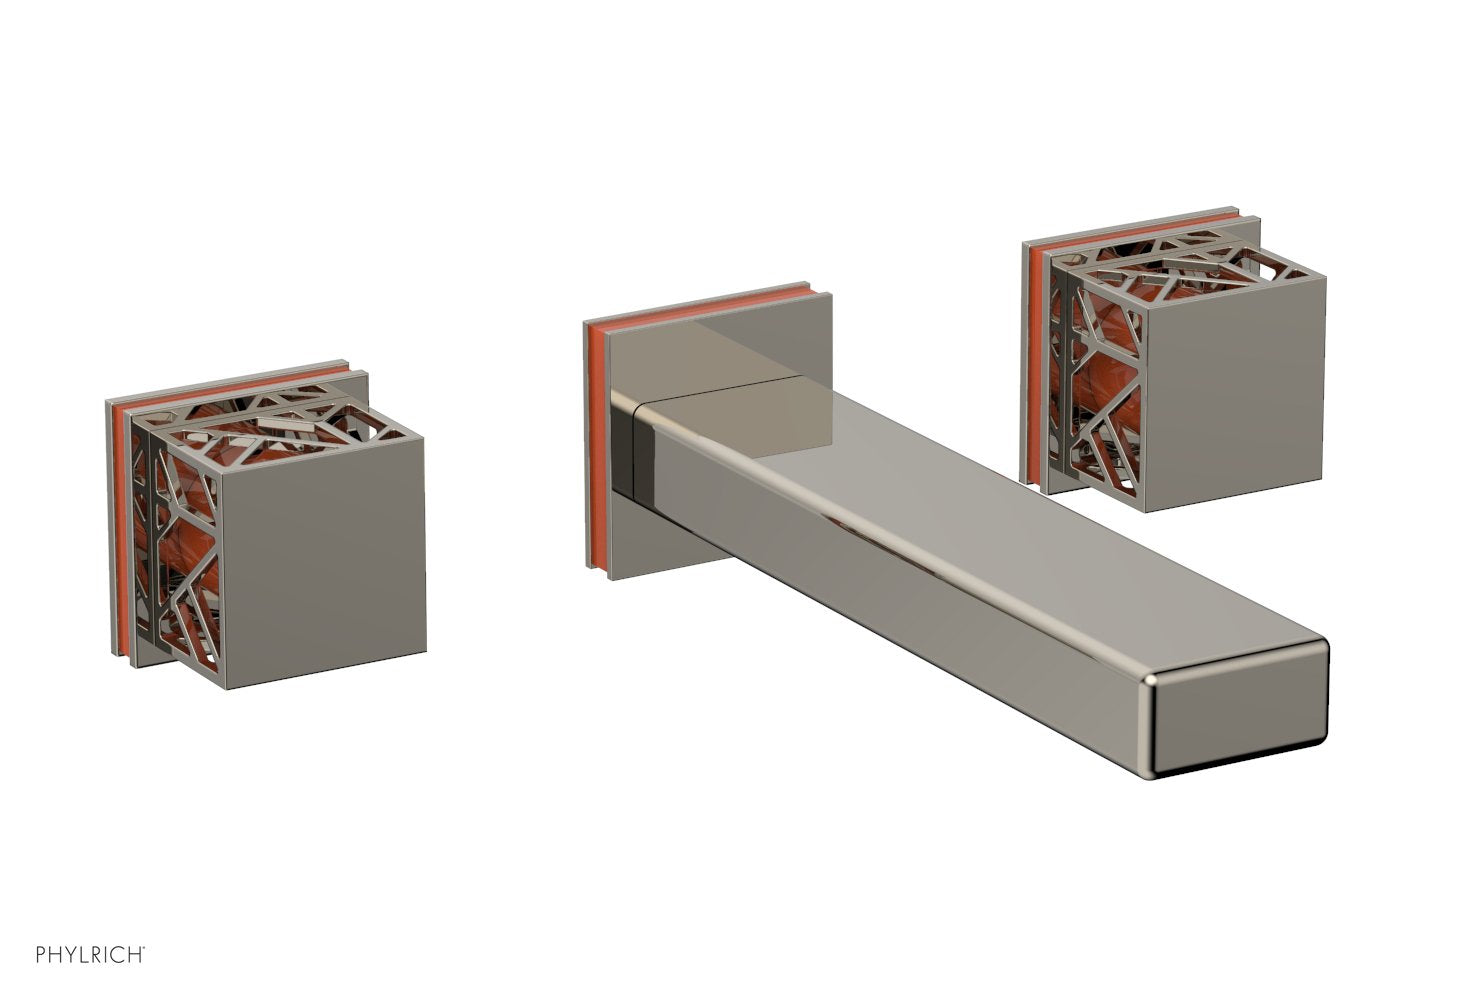 Phylrich JOLIE Wall Tub Set - Square Handles with "Orange" Accents